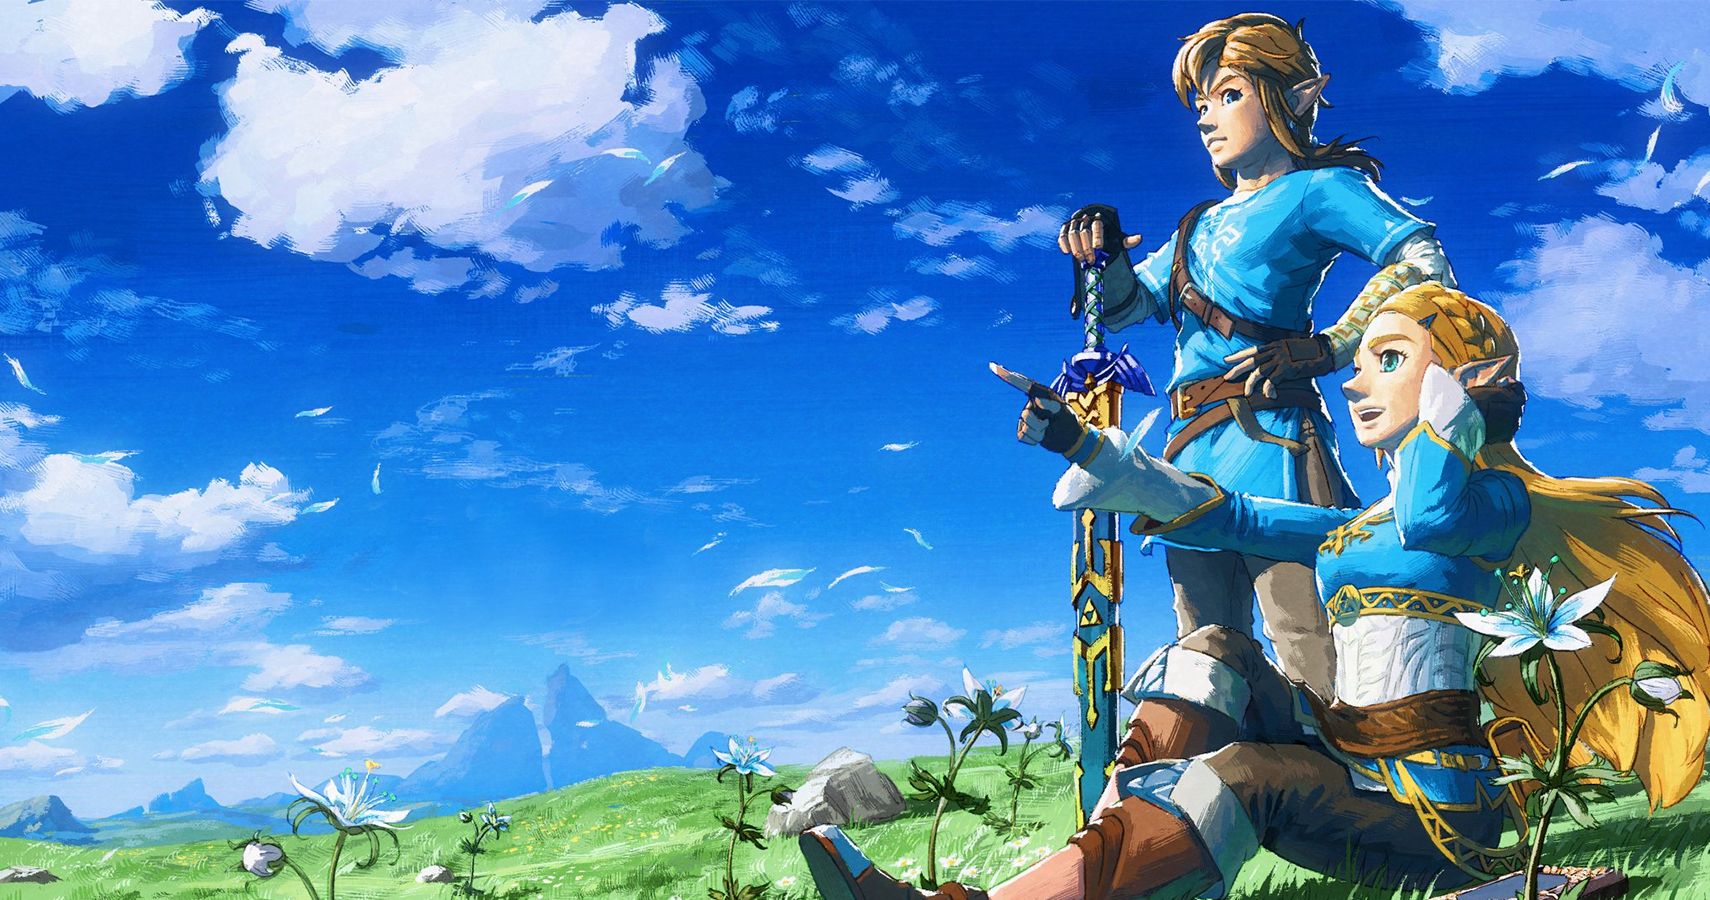 Breath Of The Wild Is Officially The BestSelling Zelda Game Of All Time (Sort Of)